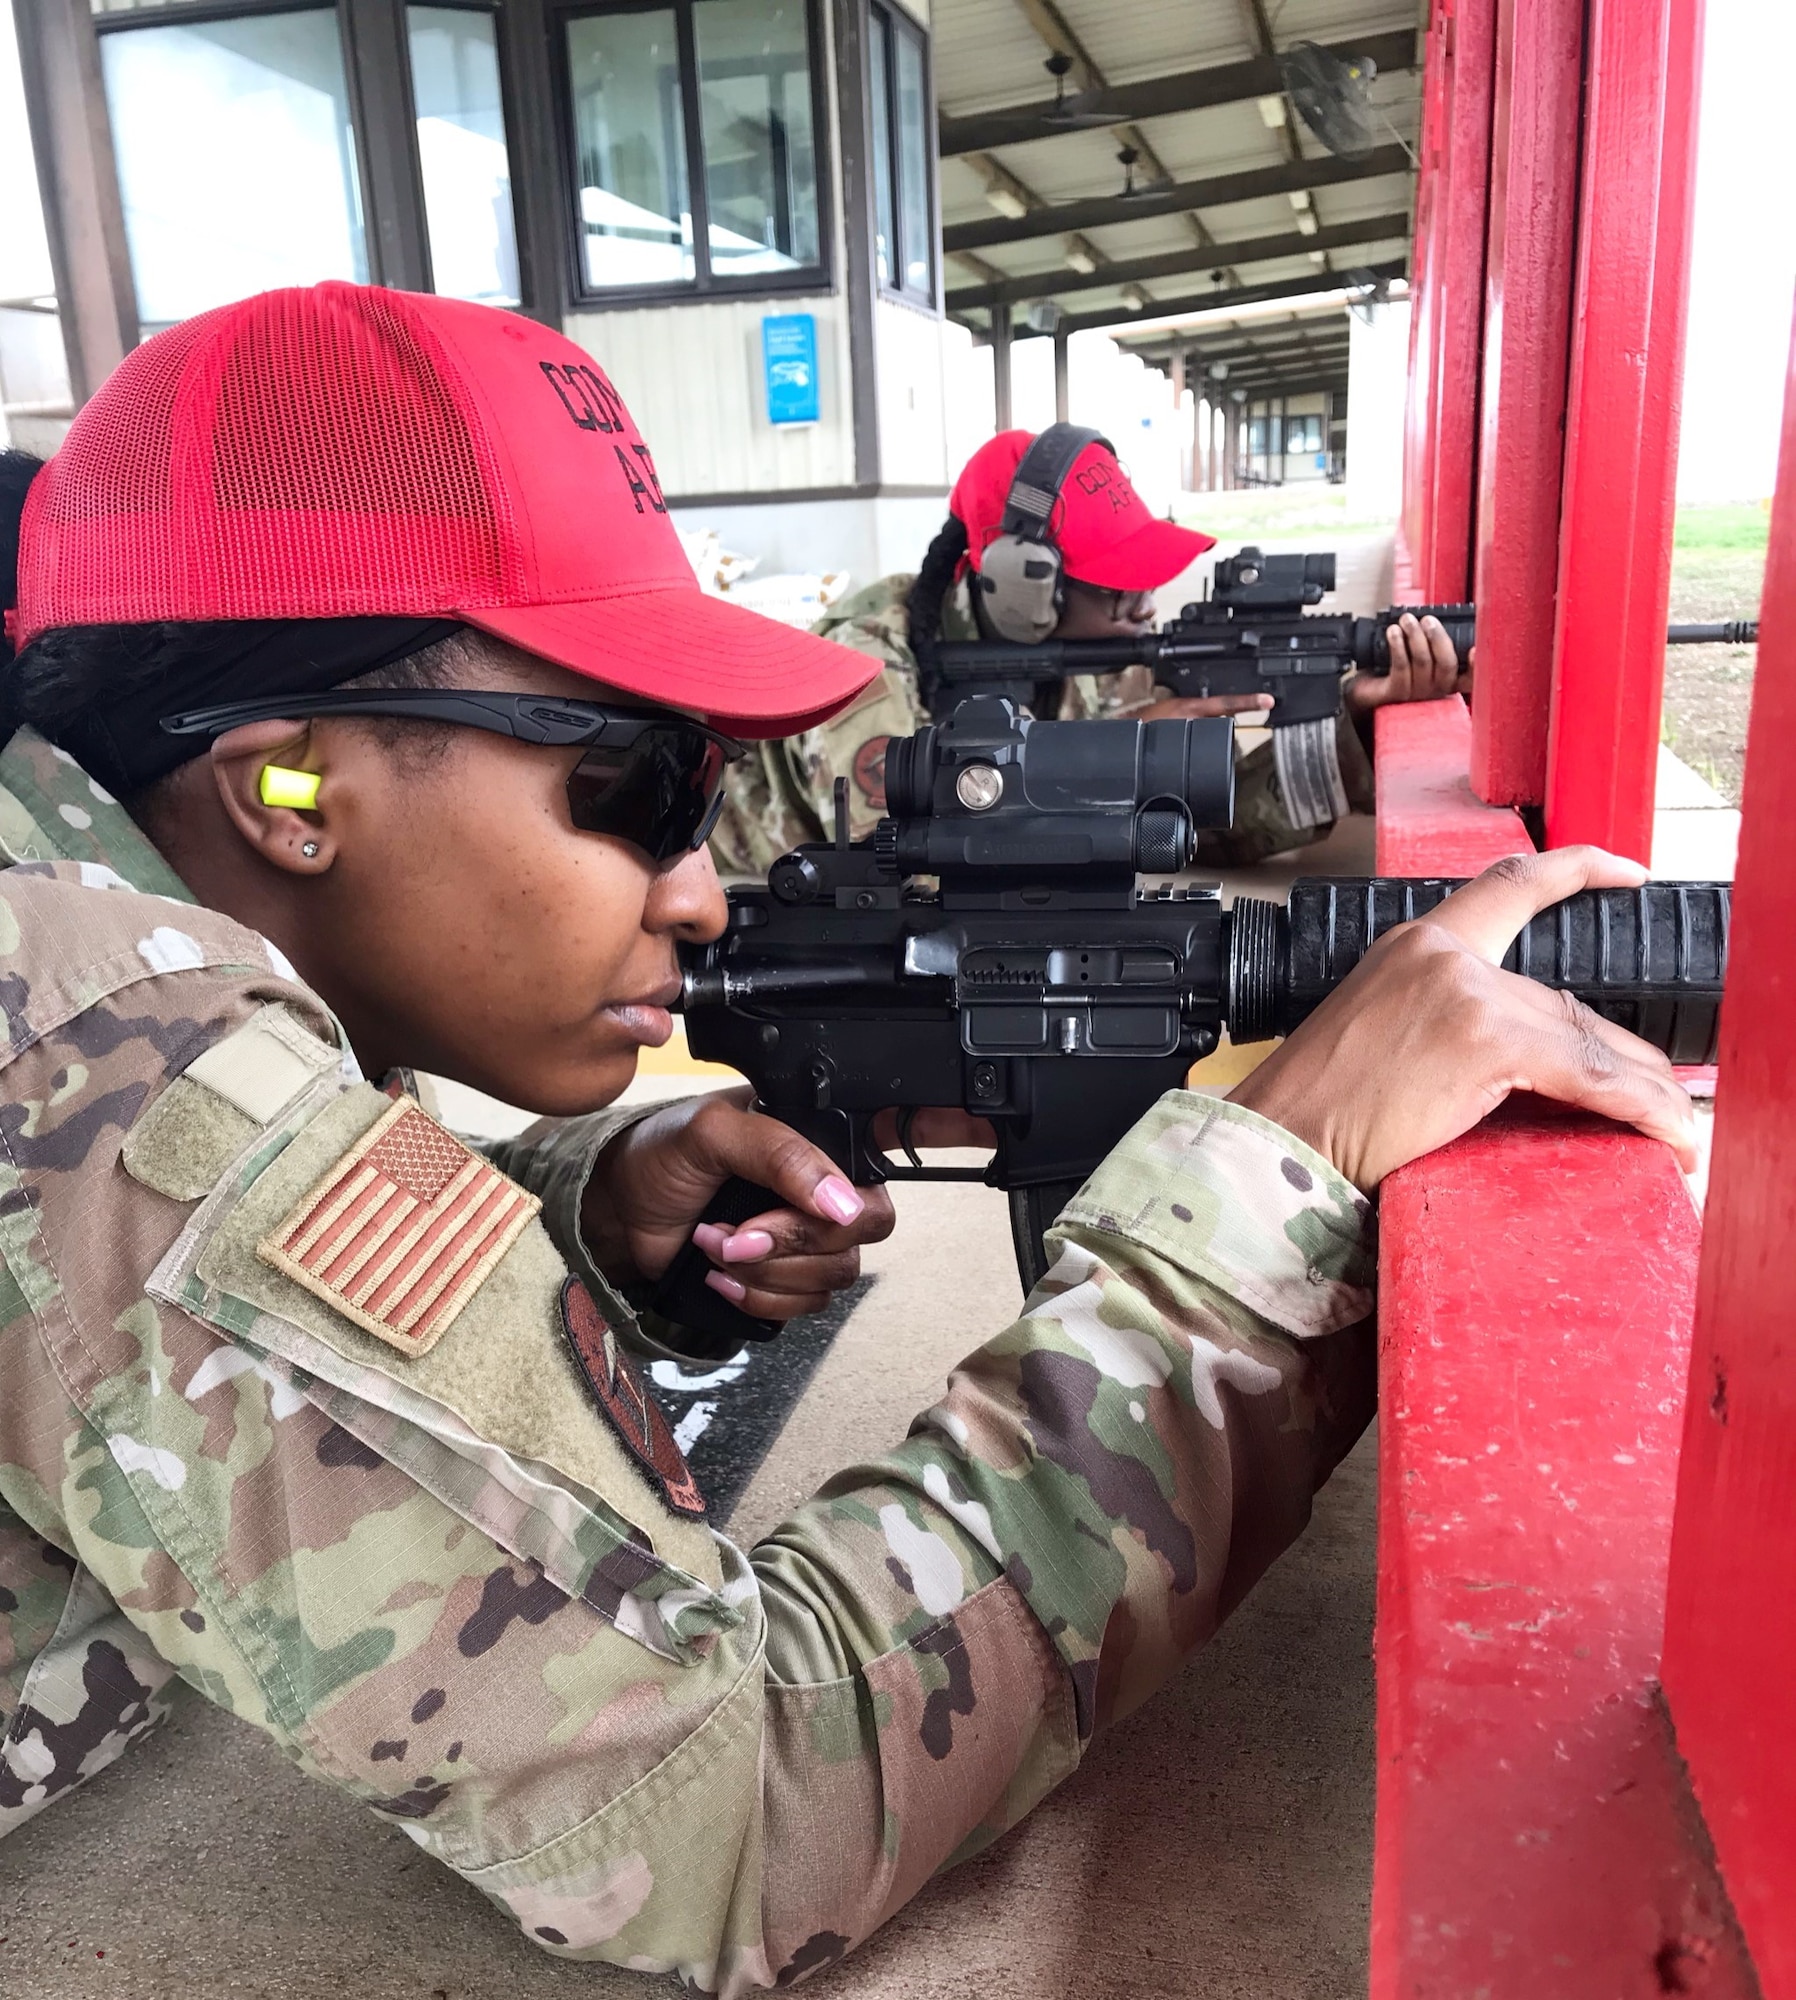 JOINT BASE SAN ANTONIO-CHAPMAN TRAINING ANNEX, Texas – Courage and resiliency are part of day-to-day operations here, so a strong mentality is nothing new for five female security forces specialists assigned to the 37th Training Support Squadron Combat Weapons Flight.